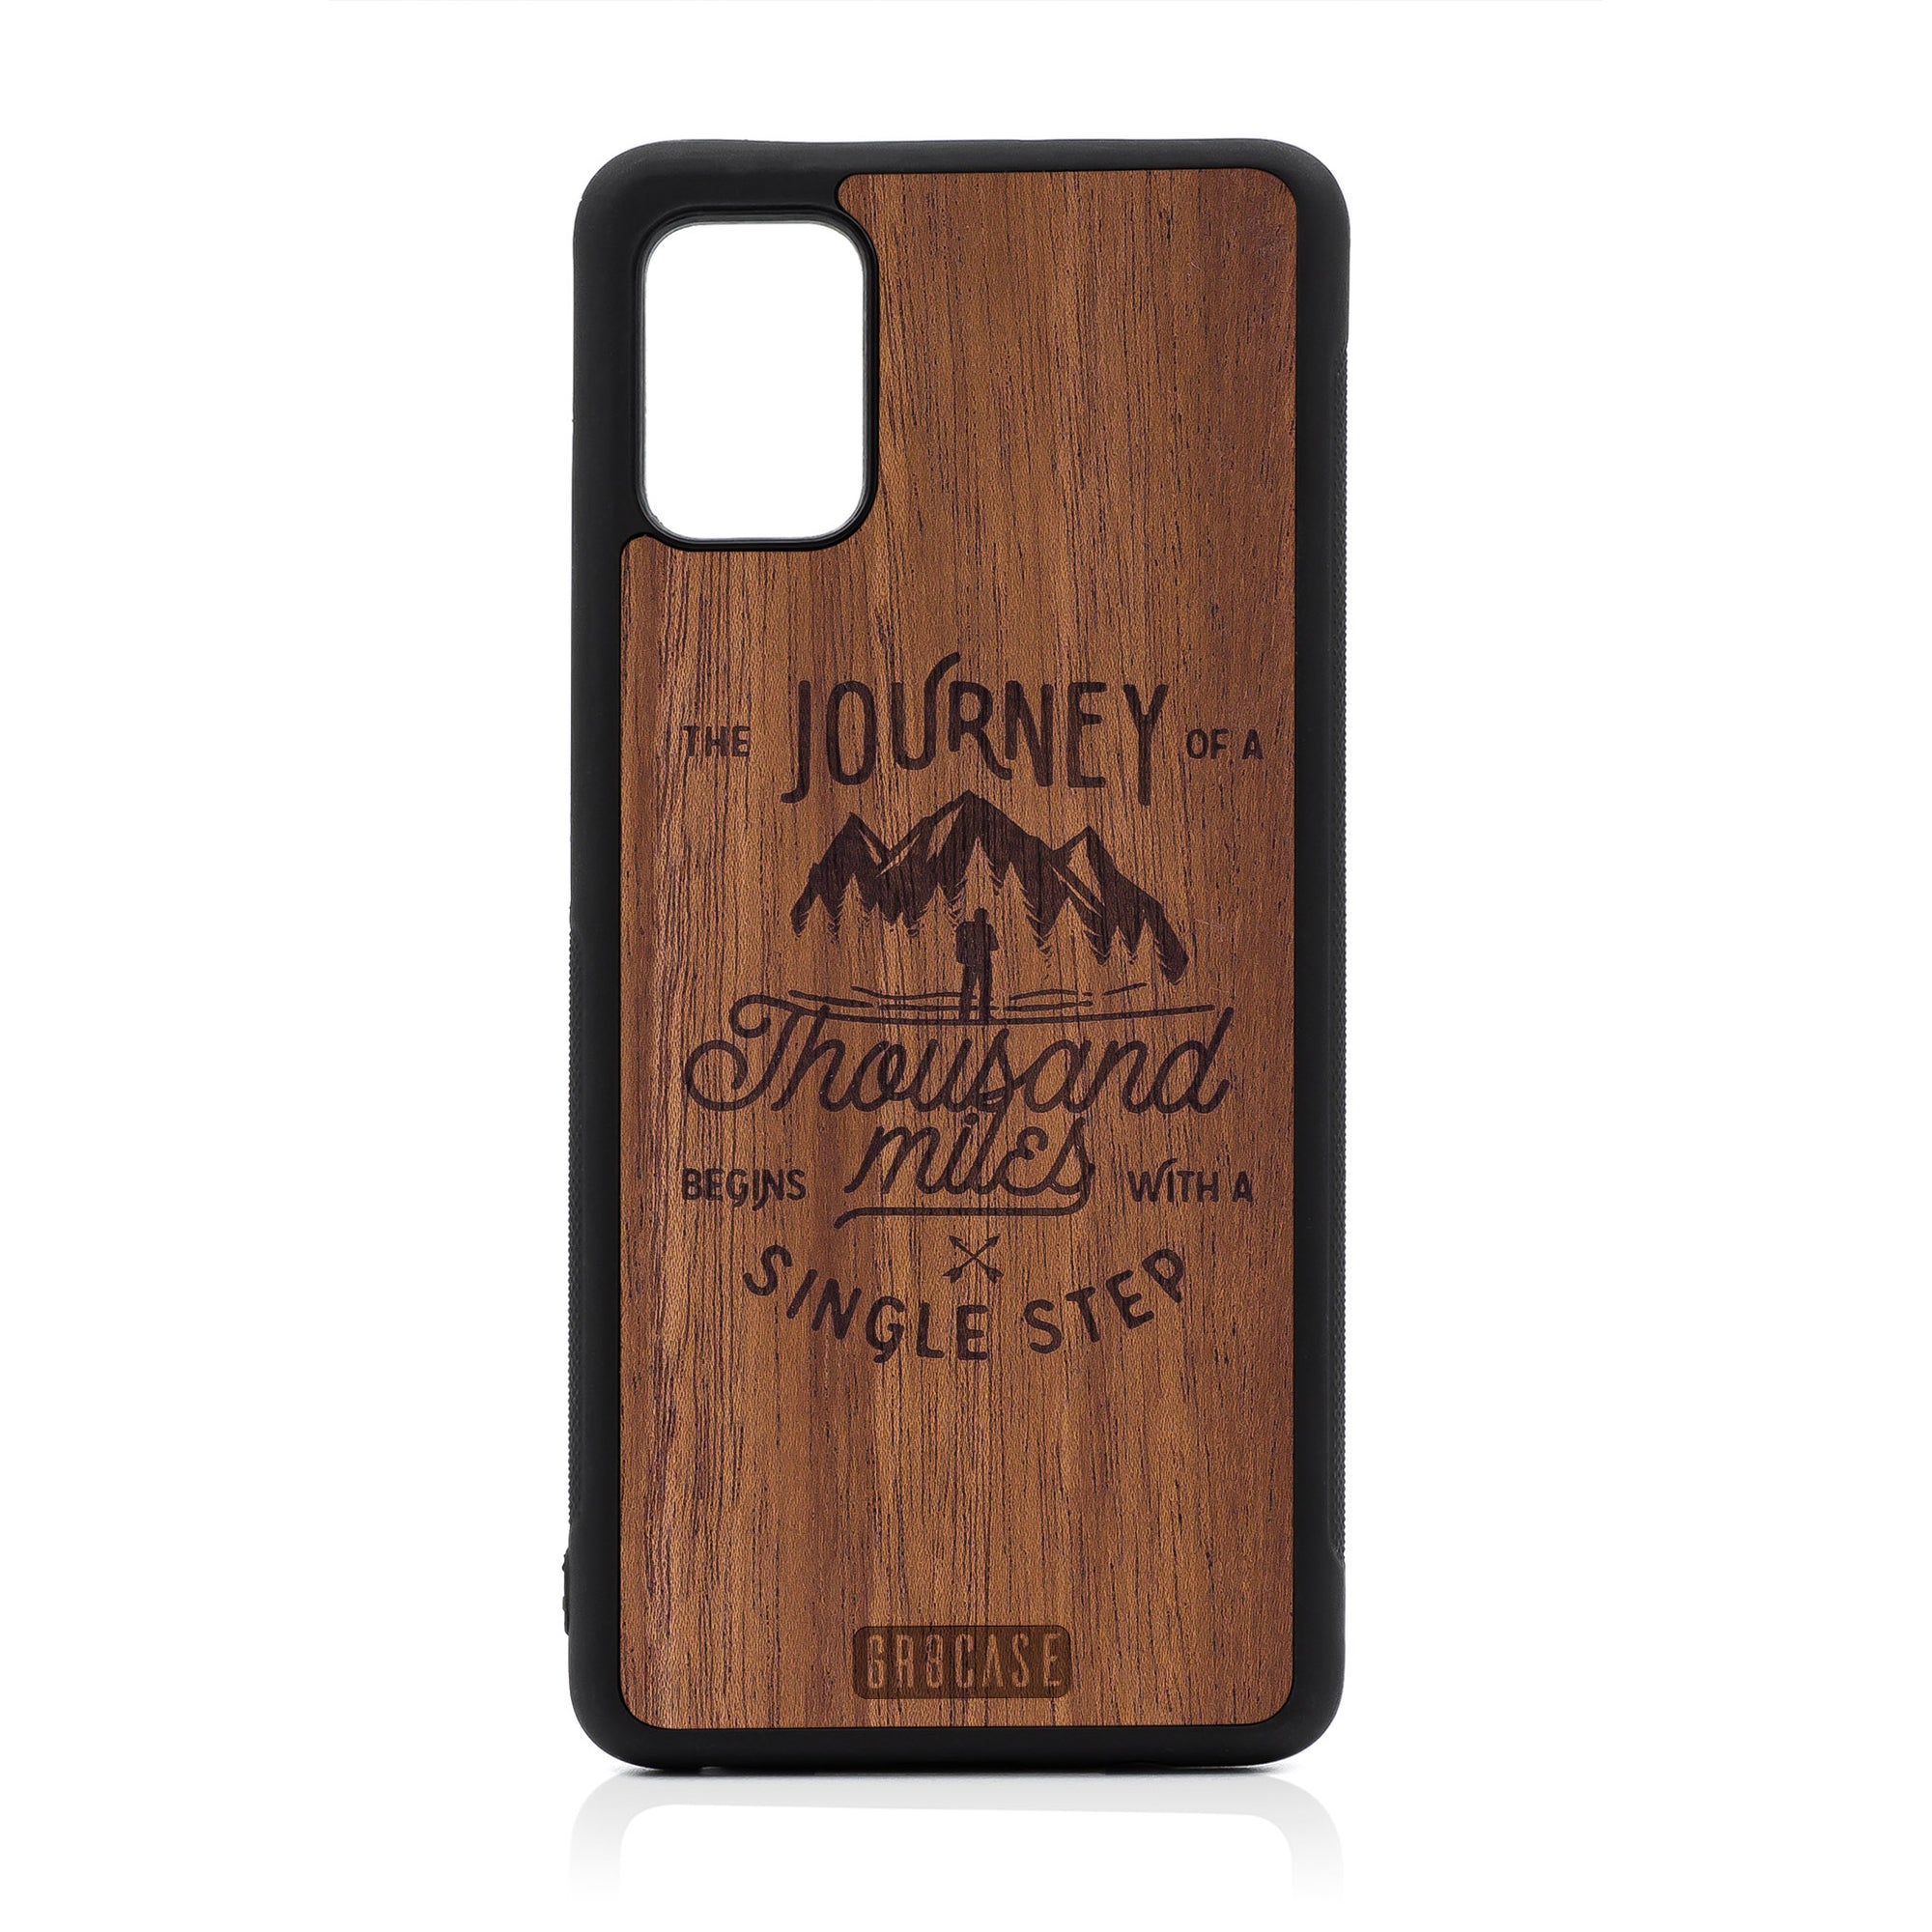 The Journey of A Thousand Miles Begins With A Single Step Design Wood Case For Samsung Galaxy A51